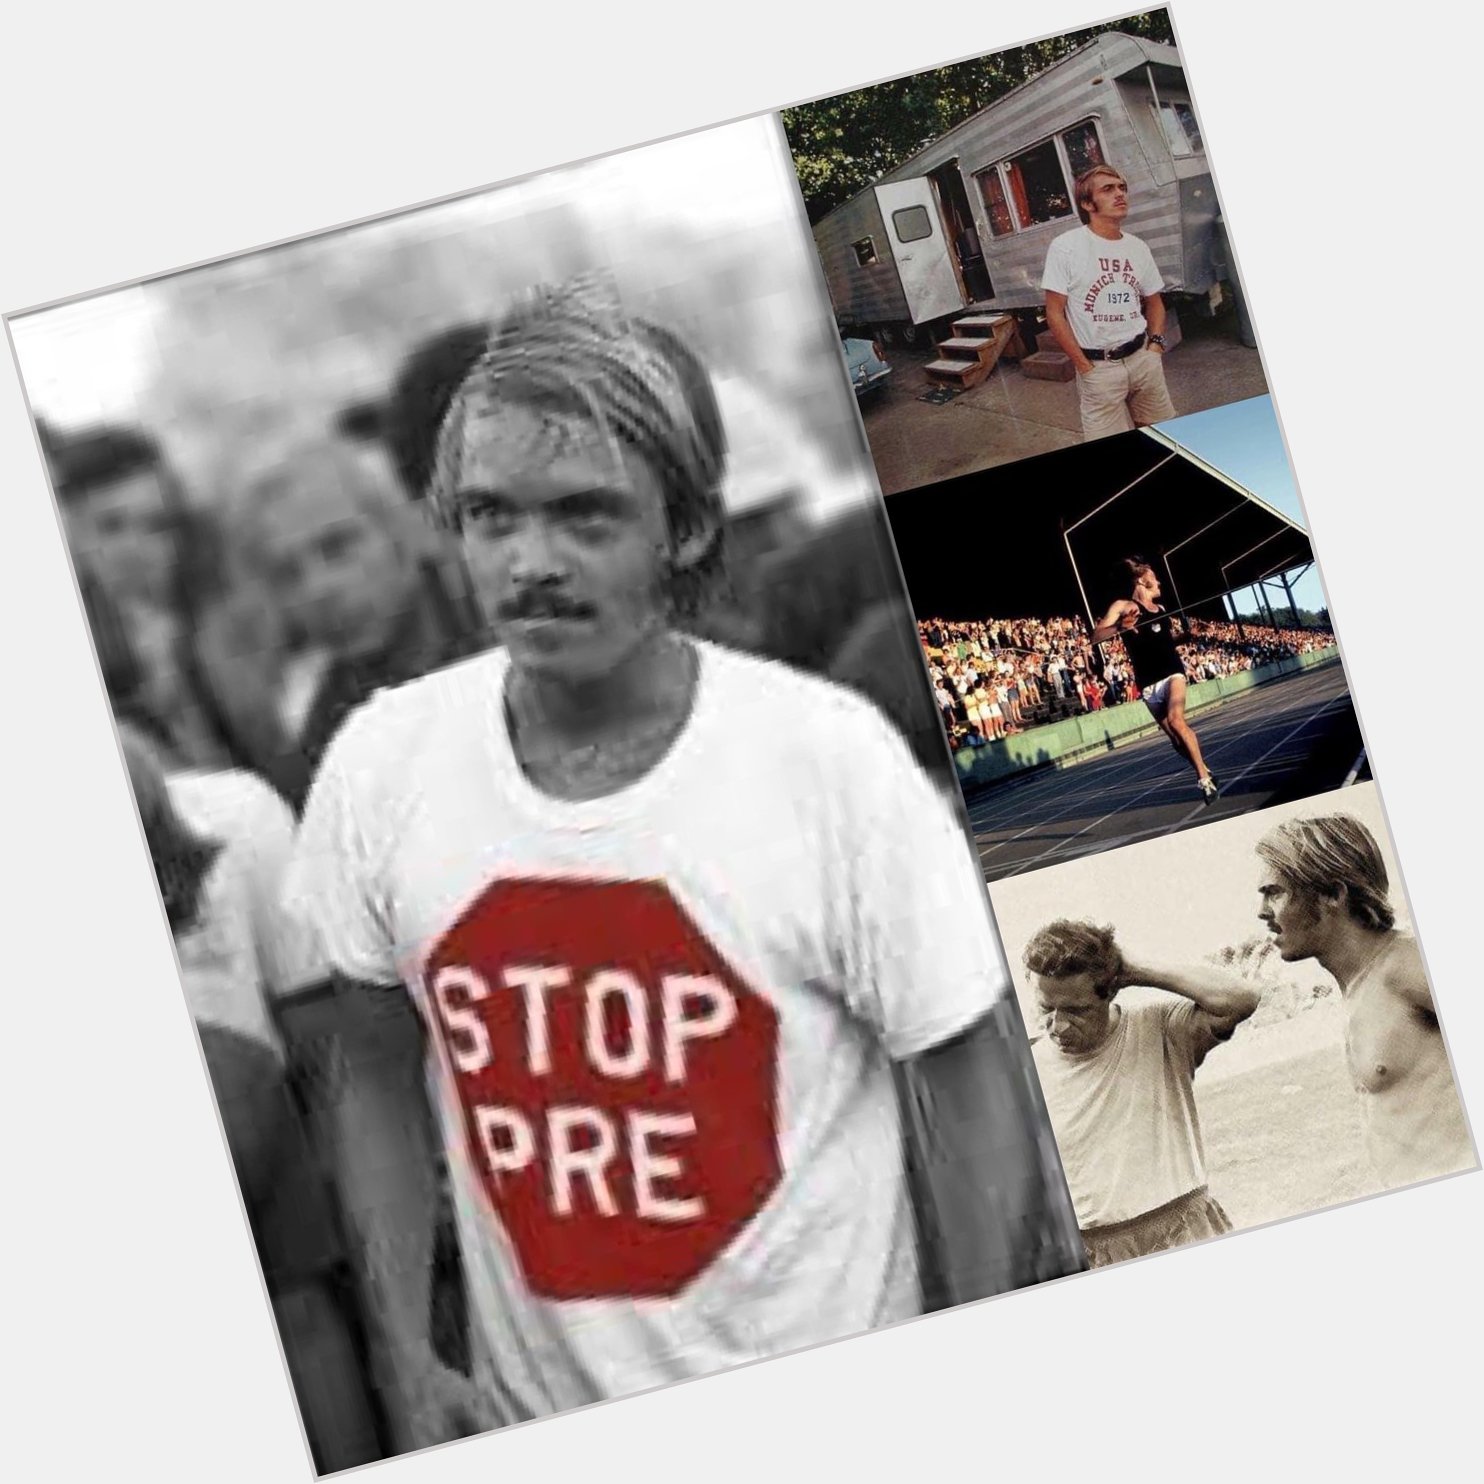 Happy birthday to Steve Prefontaine! He would have been 72 today. His legacy continues to inspire us all. 